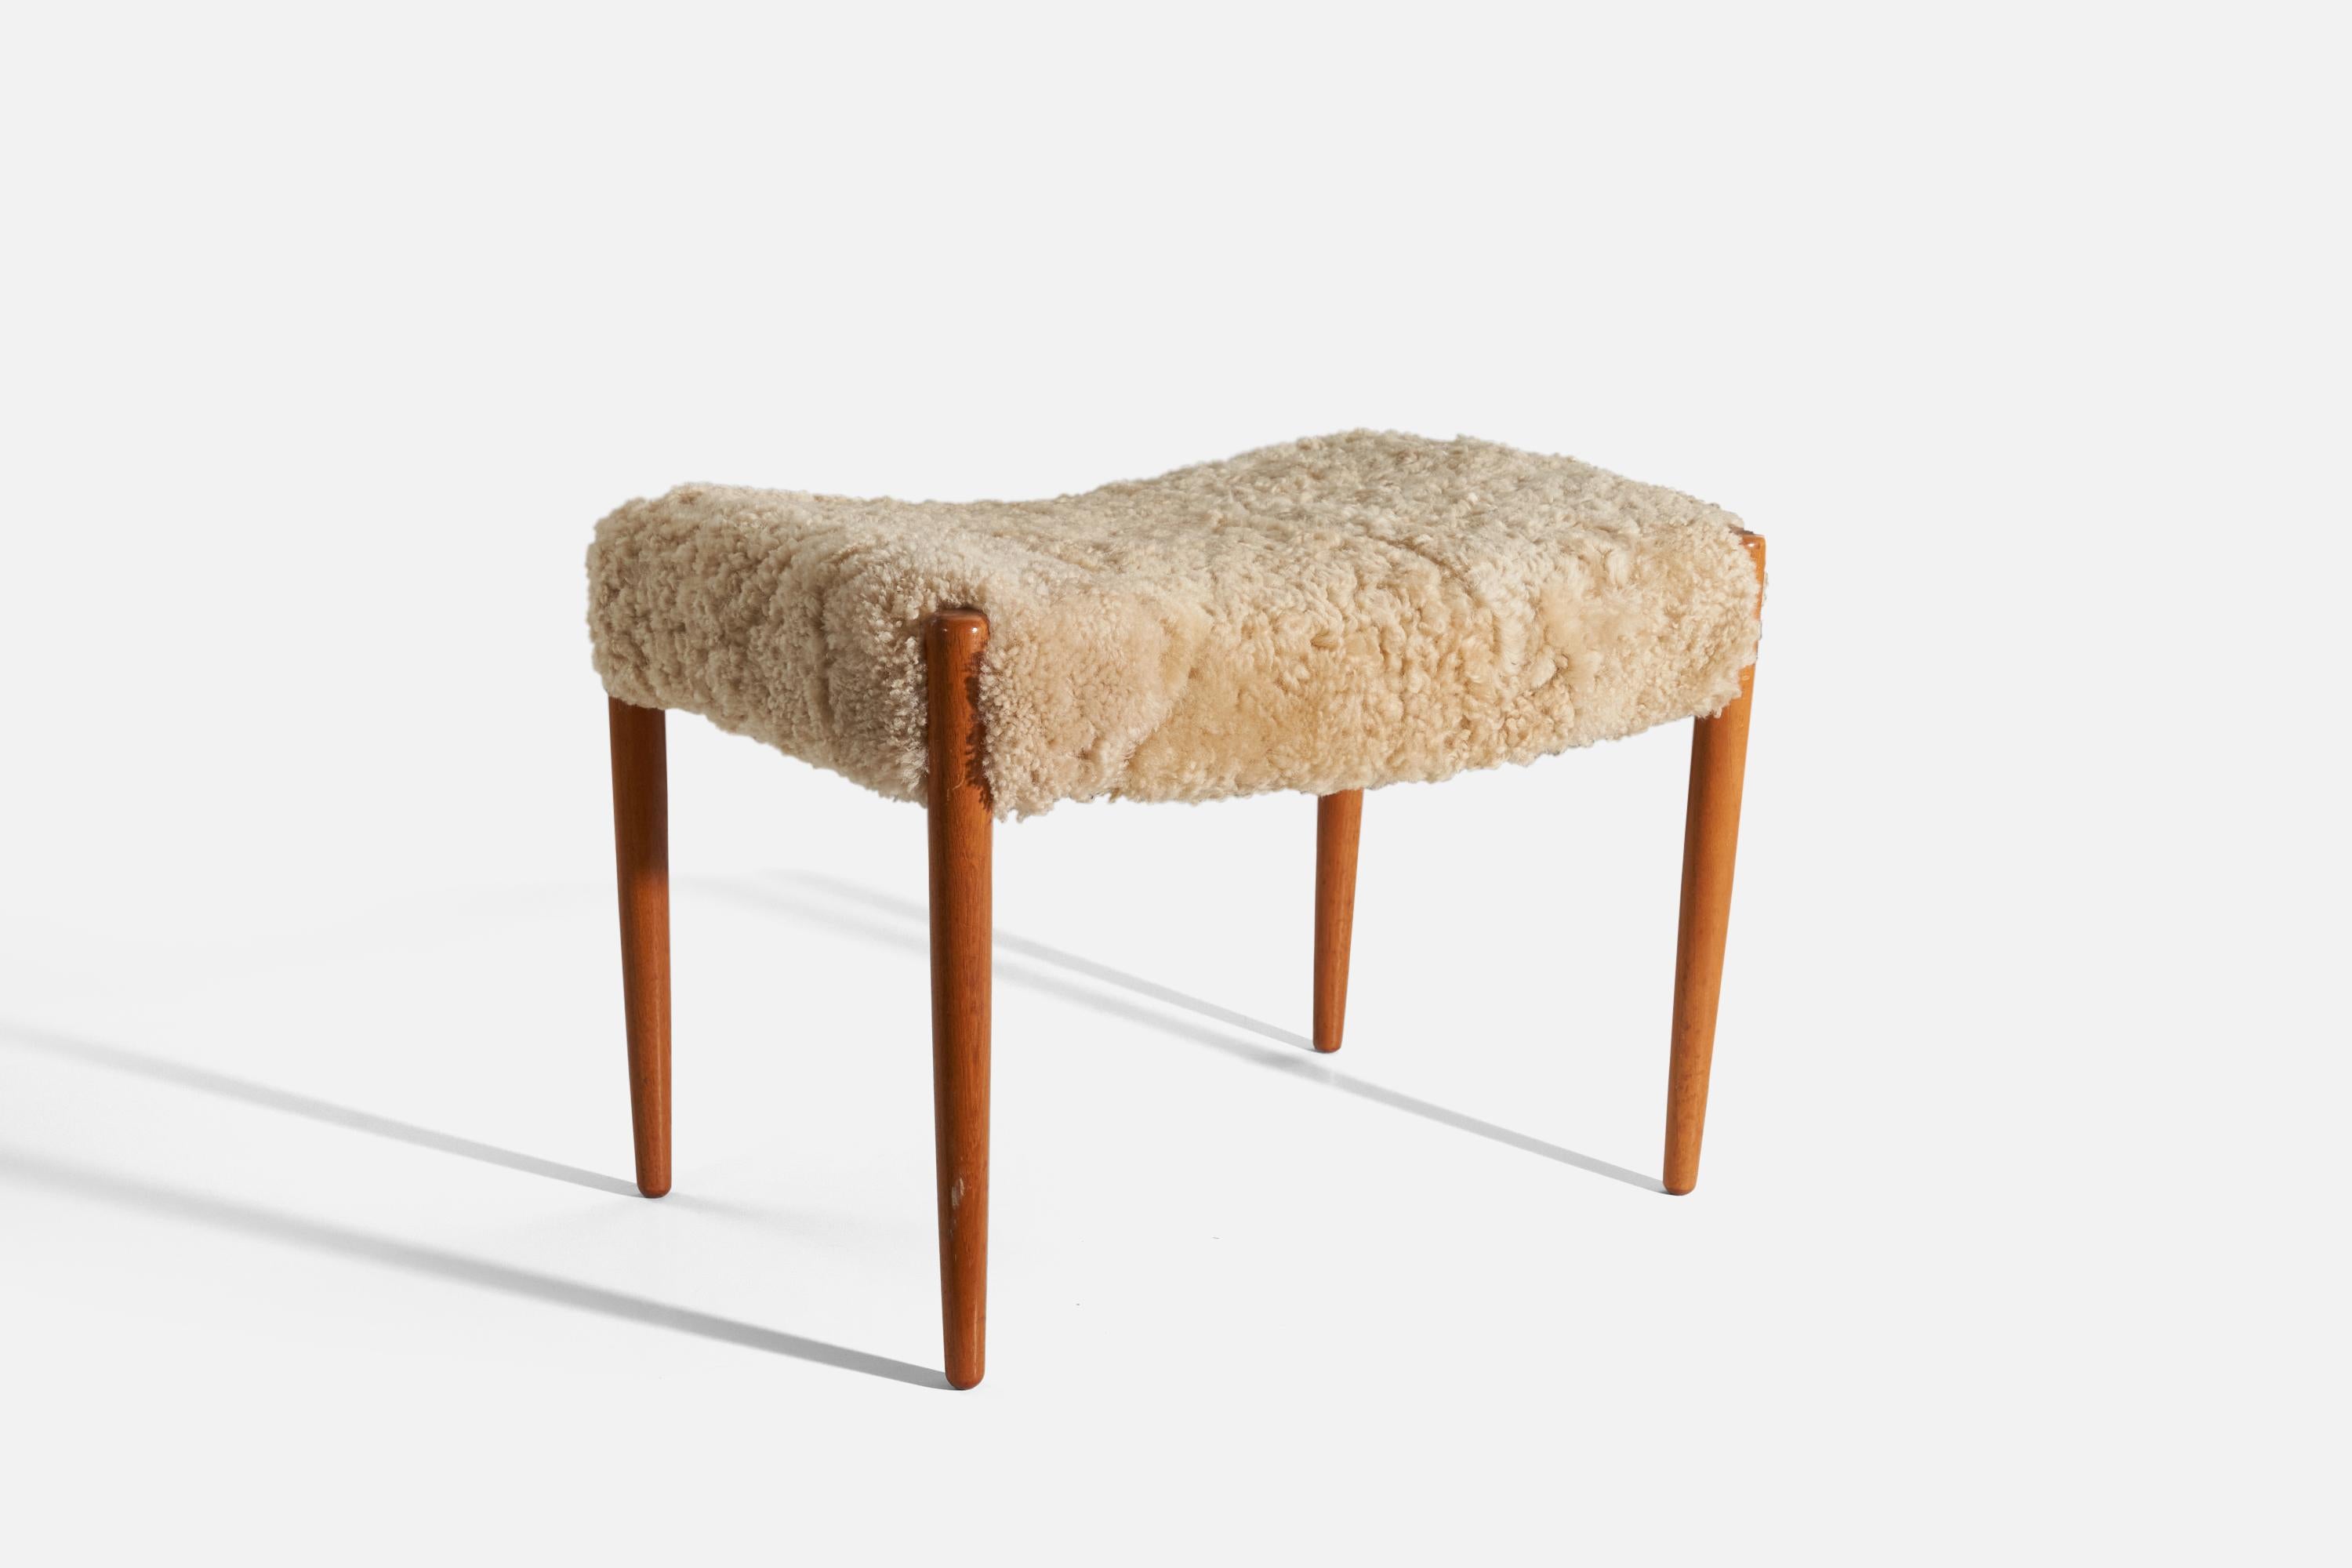 A teak and shearling stool, produced by a Swedish designer, Sweden, 1950s.